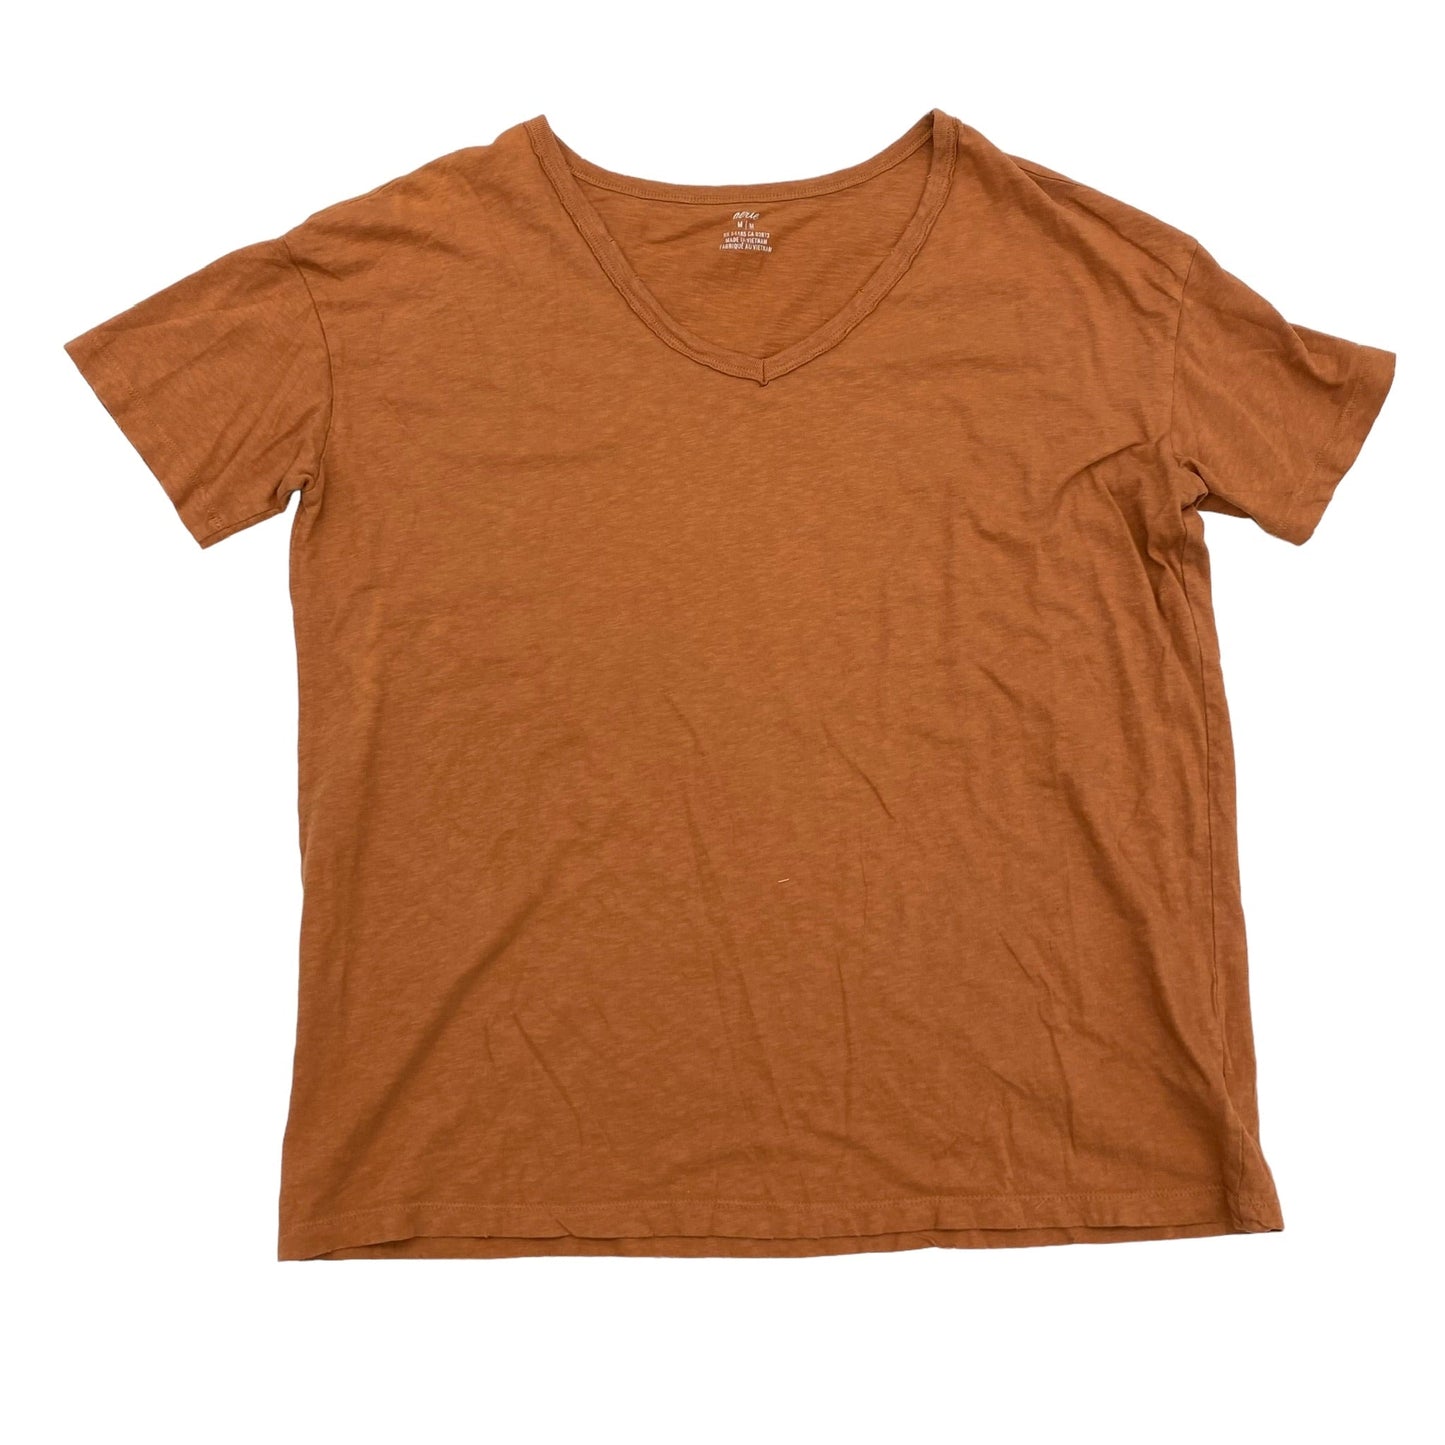 Brown Top Short Sleeve Aerie, Size M